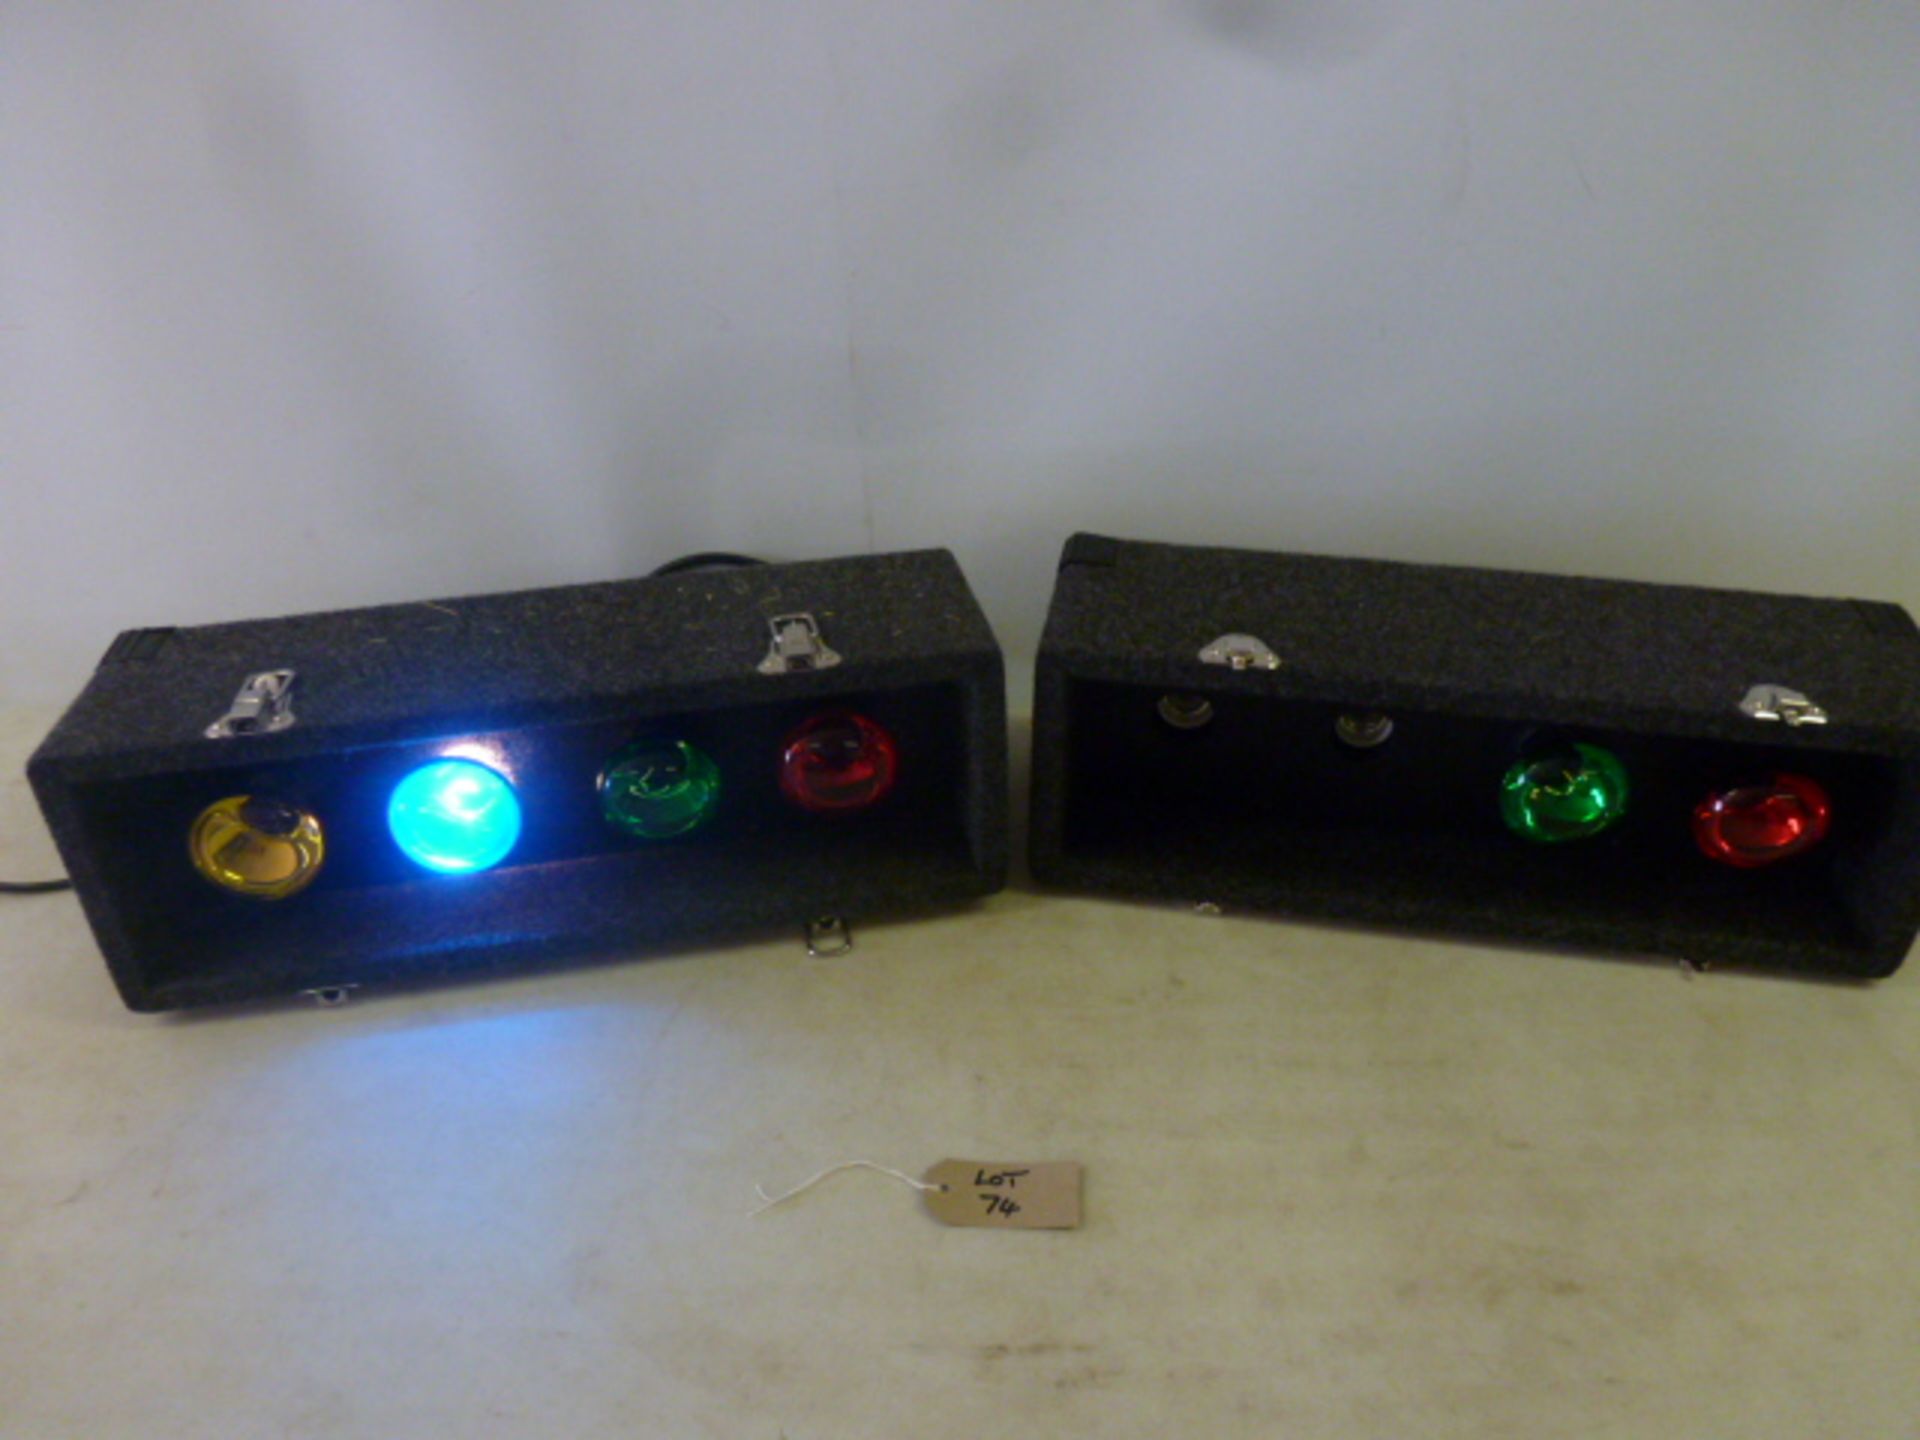 Sound LAB 8 Lamp Light Box with Sound to Light Function, Model G005FB, with Power Supply.